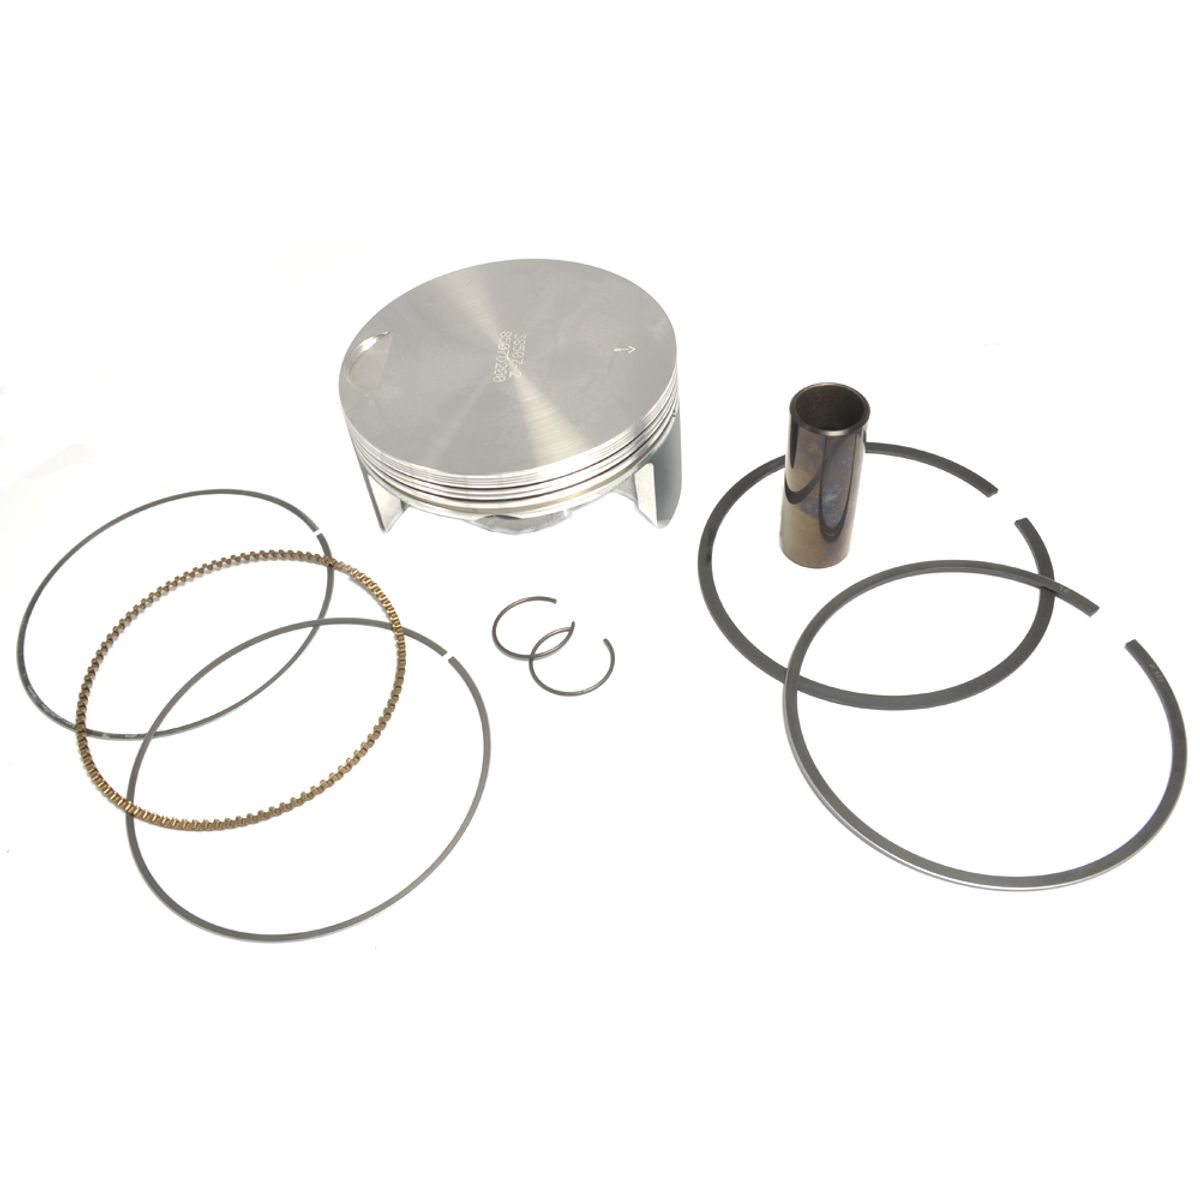 Piston kit Athena 660 cc, d.101.93 mm forged for Yamaha XTZ 660 91-98/YFM  660 Grizzly/Raptor 01-09 (for original cylinder) Heavy Tuned: Cheap  spareparts for Scooter, Bikes, Motorcycles  Vespa